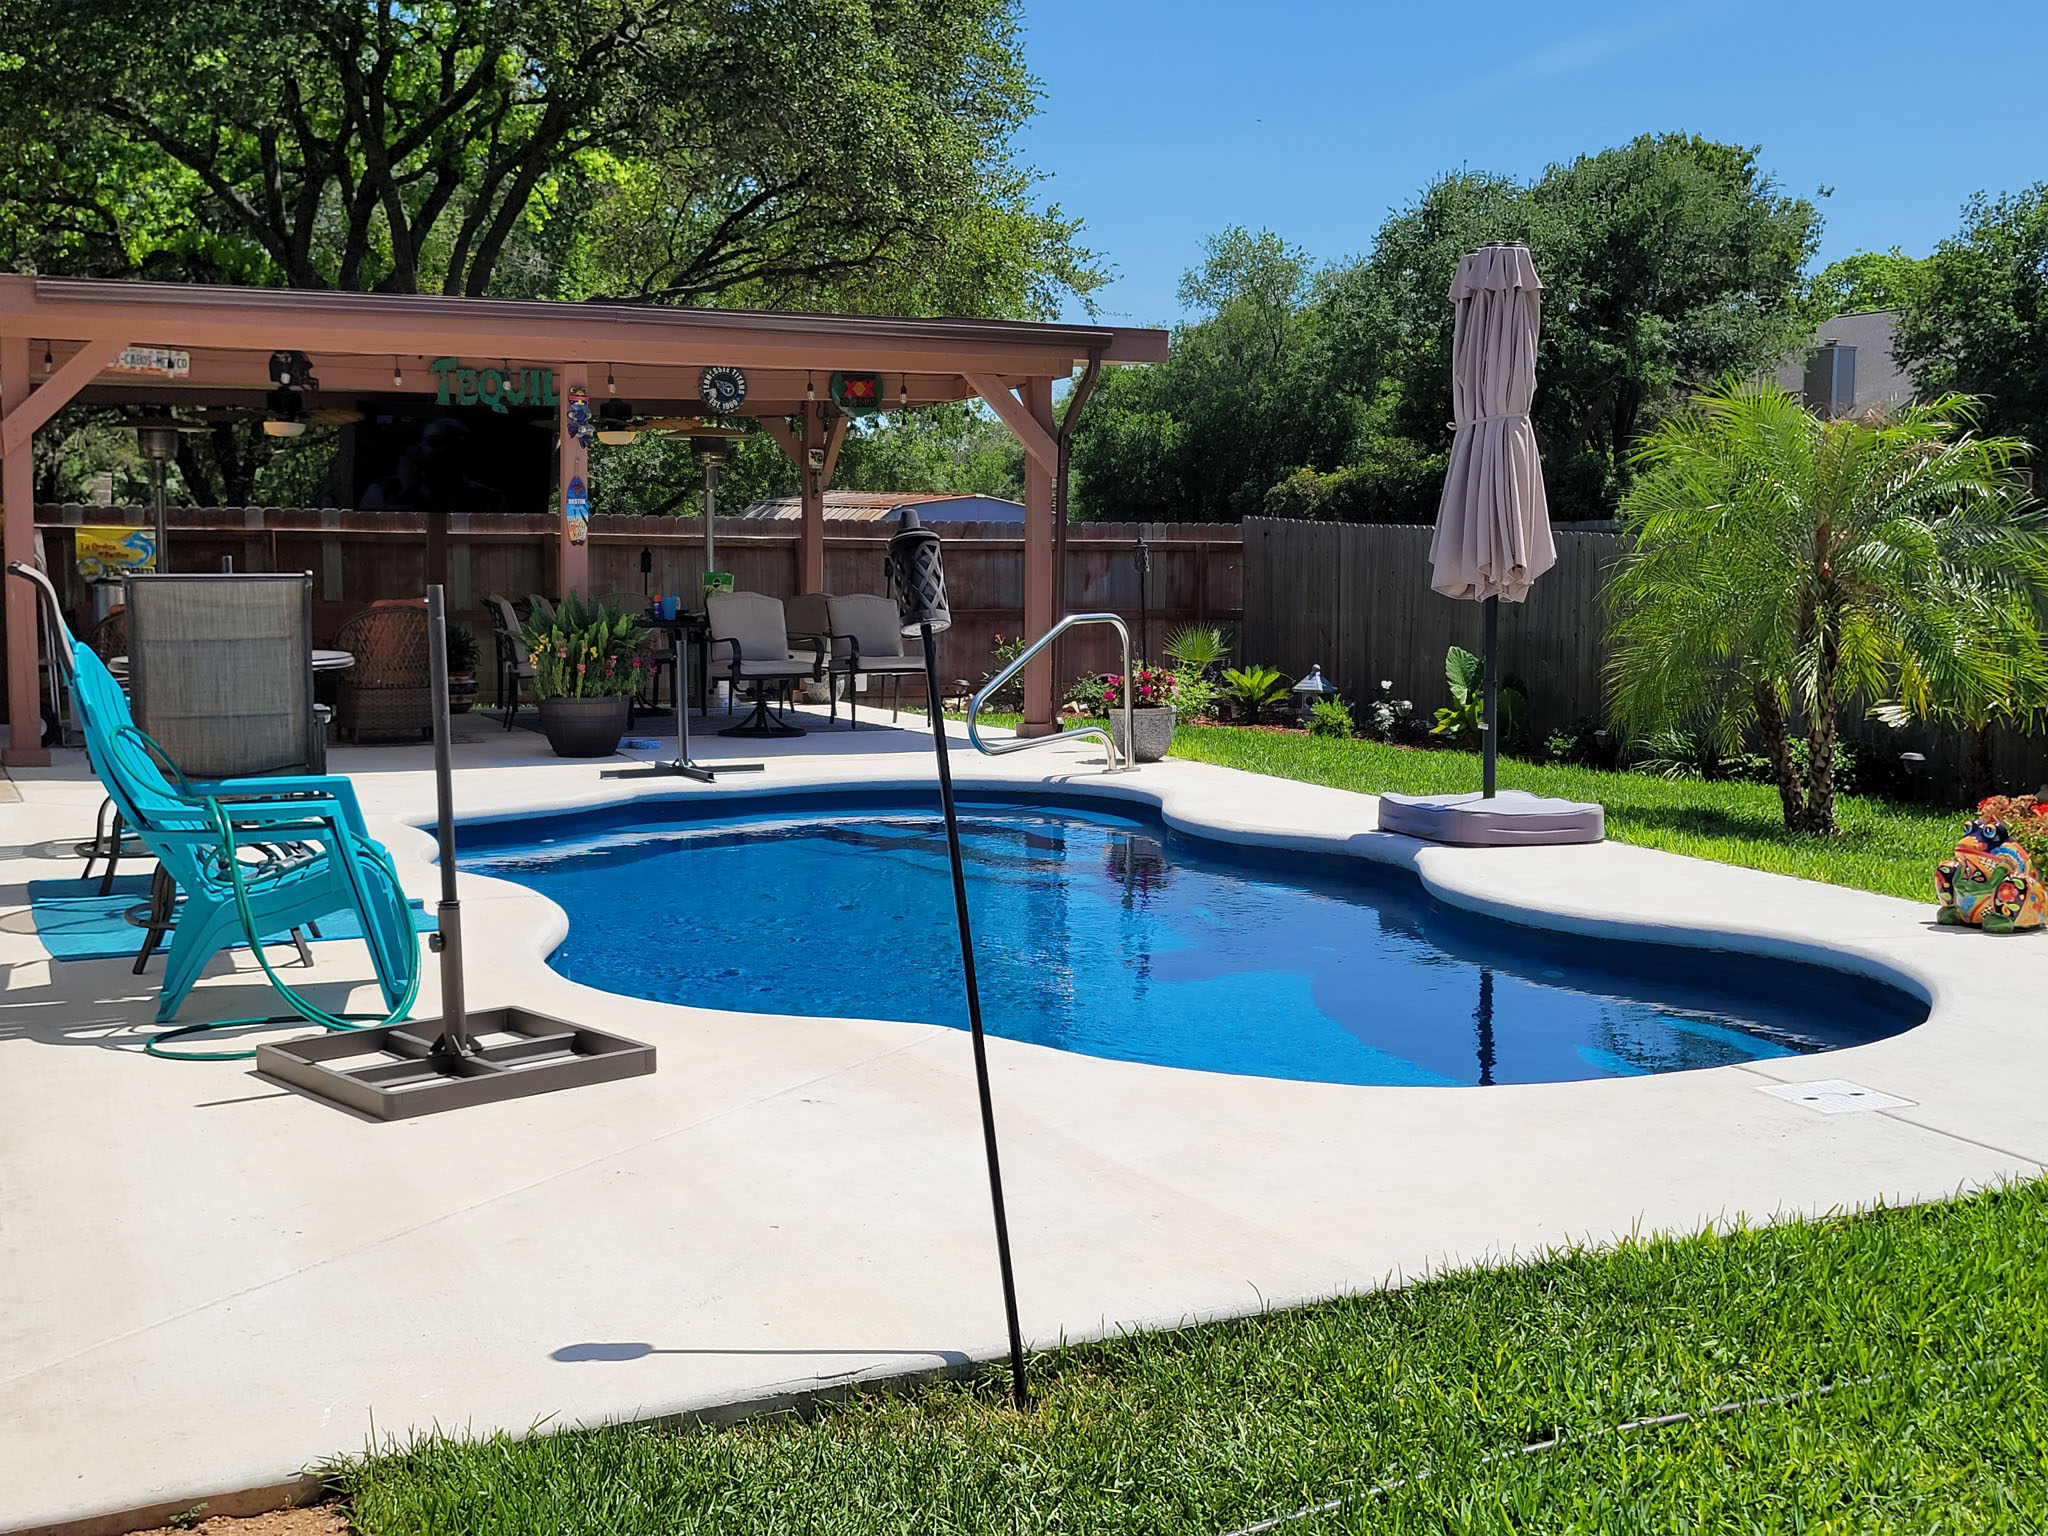 The Atlantis fiberglass pool in San Antonio is an elegant free form swimming pool with smooth concrete coping and decking to dress out your Backyard Oasis